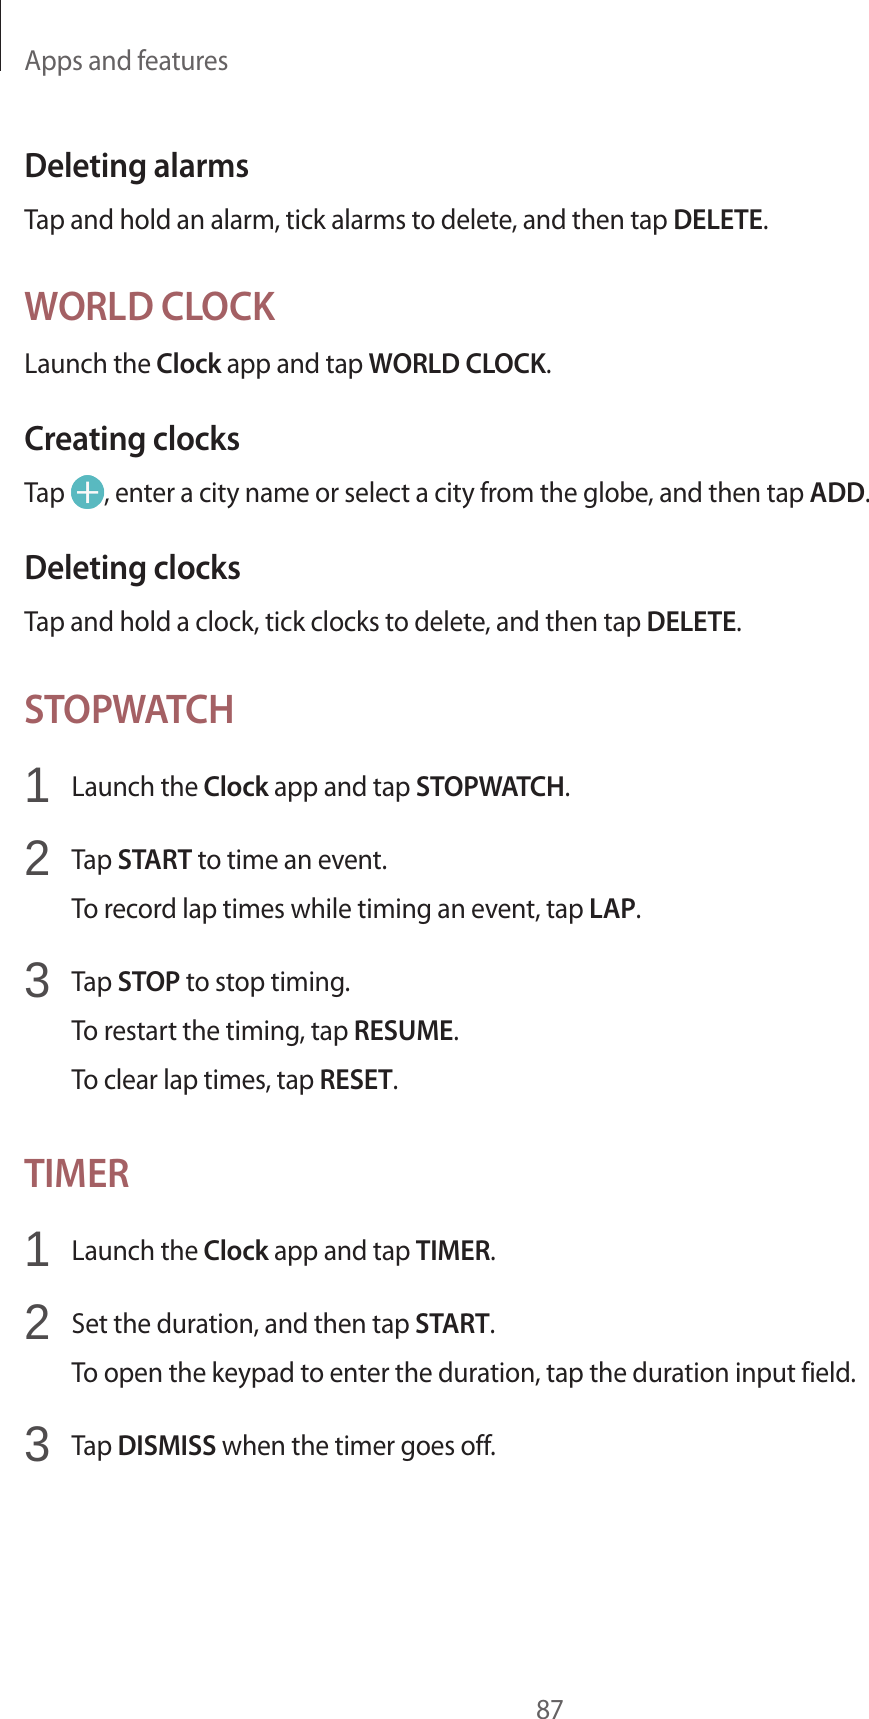 Apps and features87Deleting alarmsTap and hold an alarm, tick alarms to delete, and then tap DELETE.WORLD CLOCKLaunch the Clock app and tap WORLD CLOCK.Creating clocksTap  , enter a city name or select a city from the globe, and then tap ADD.Deleting clocksTap and hold a clock, tick clocks to delete, and then tap DELETE.STOPWATCH1  Launch the Clock app and tap STOPWATCH.2  Tap START to time an event.To record lap times while timing an event, tap LAP.3  Tap STOP to stop timing.To restart the timing, tap RESUME.To clear lap times, tap RESET.TIMER1  Launch the Clock app and tap TIMER.2  Set the duration, and then tap START.To open the keypad to enter the duration, tap the duration input field.3  Tap DISMISS when the timer goes off.